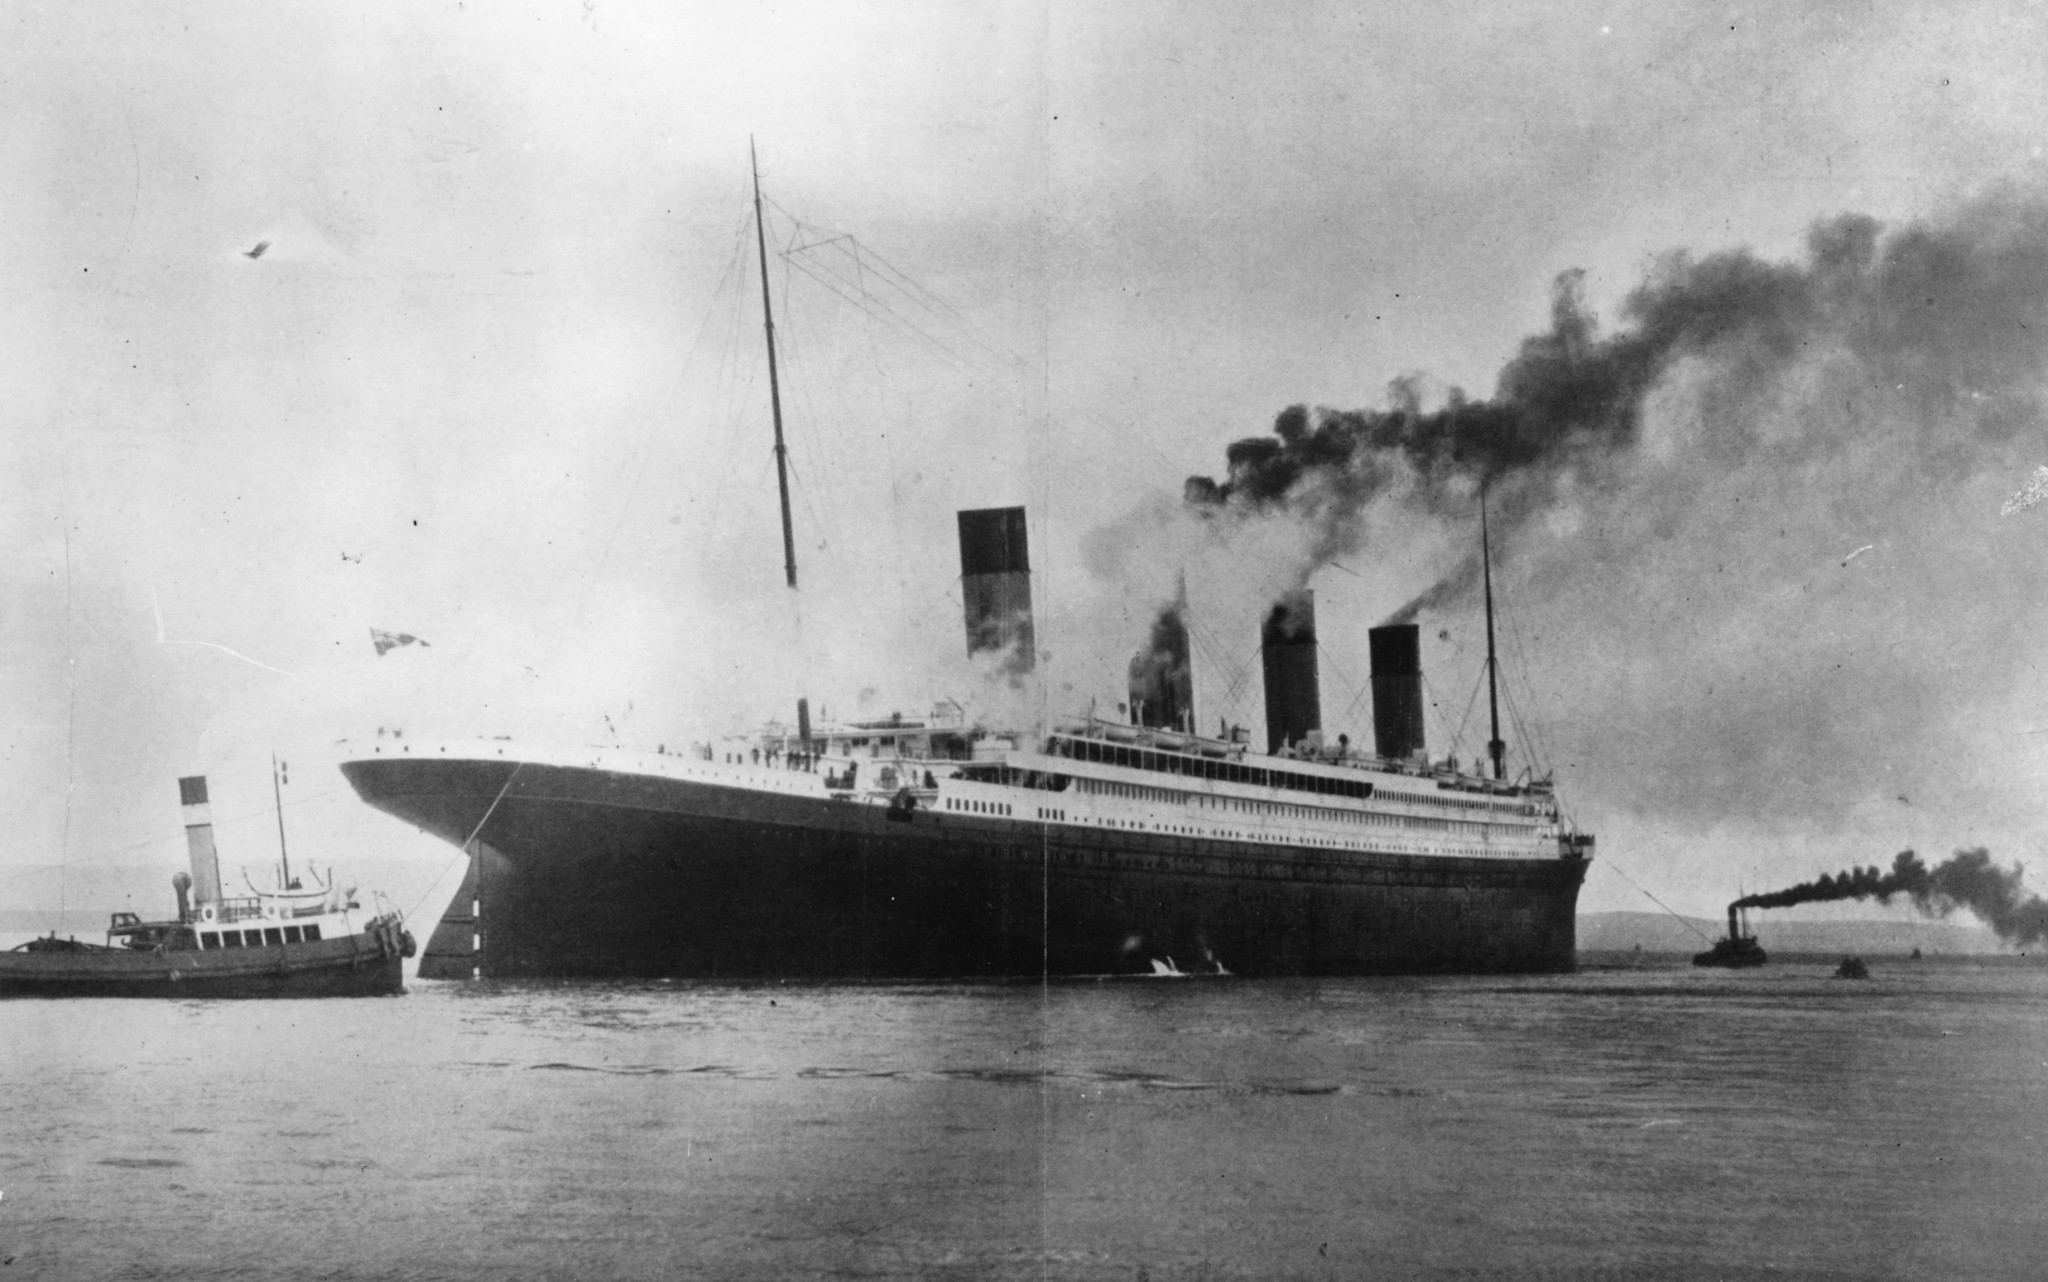 Charles Duane Williams passed away when the Titanic sank ©Getty Images